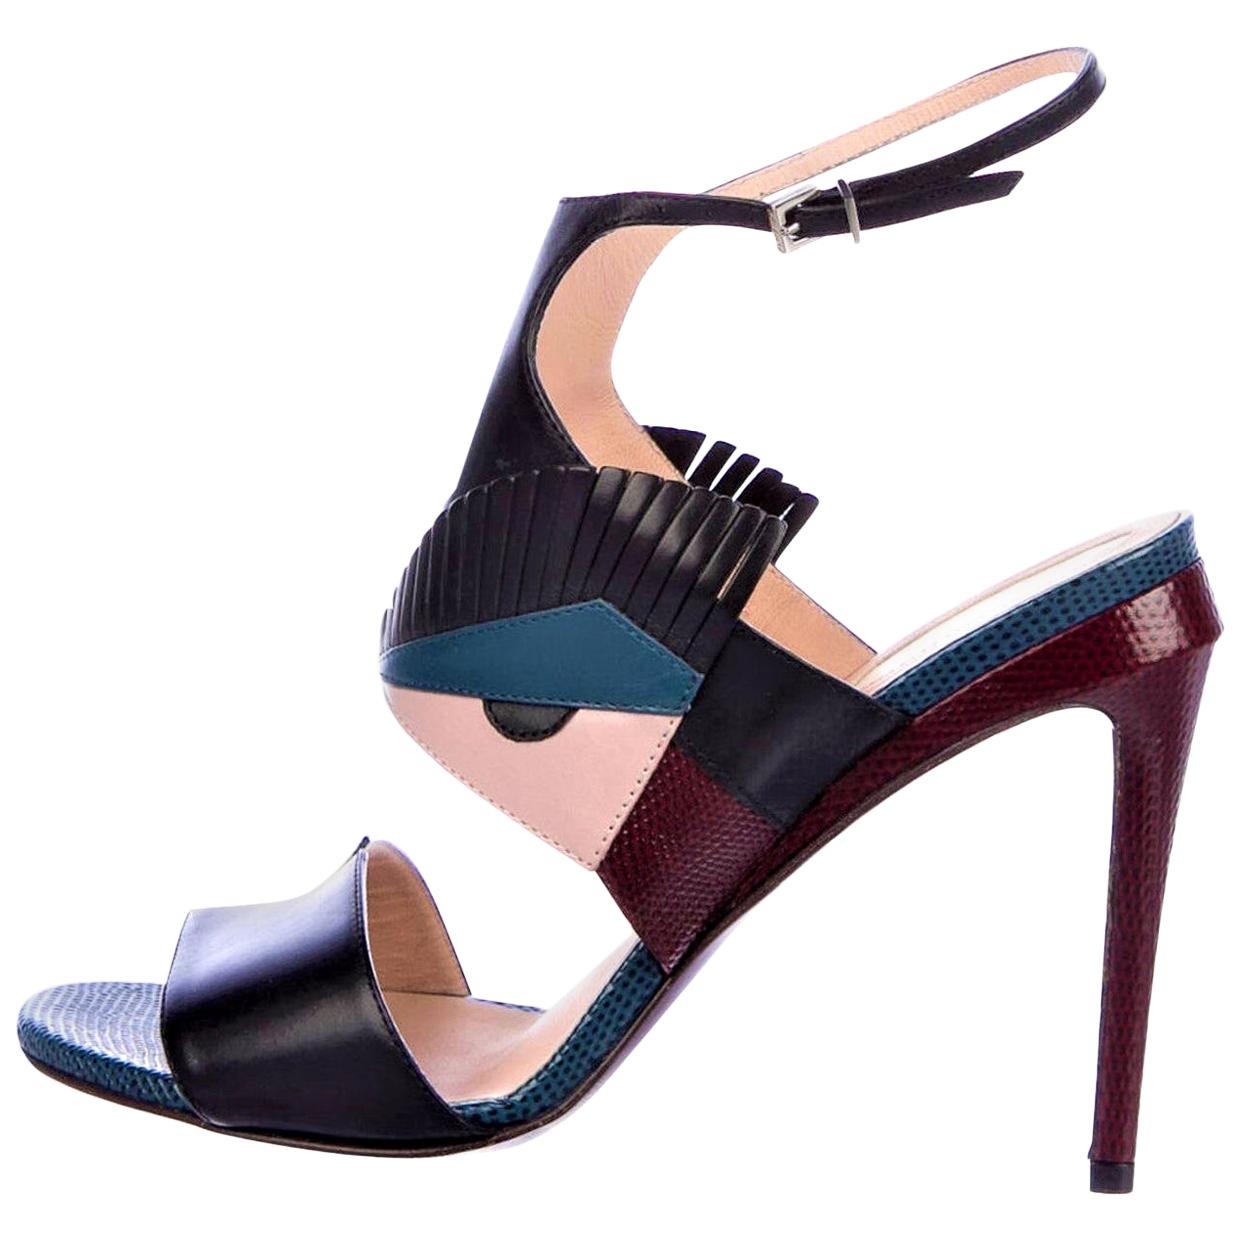 Fendi Karl Lagerfeld
Monster Bugs Leather Heels
* Retail $1375
* Size 37.5
* Silver Adjustable Strap
Monster Bugs
*Blue Black Pink-Cream Leather
* Leather Insole
Heel 4.25